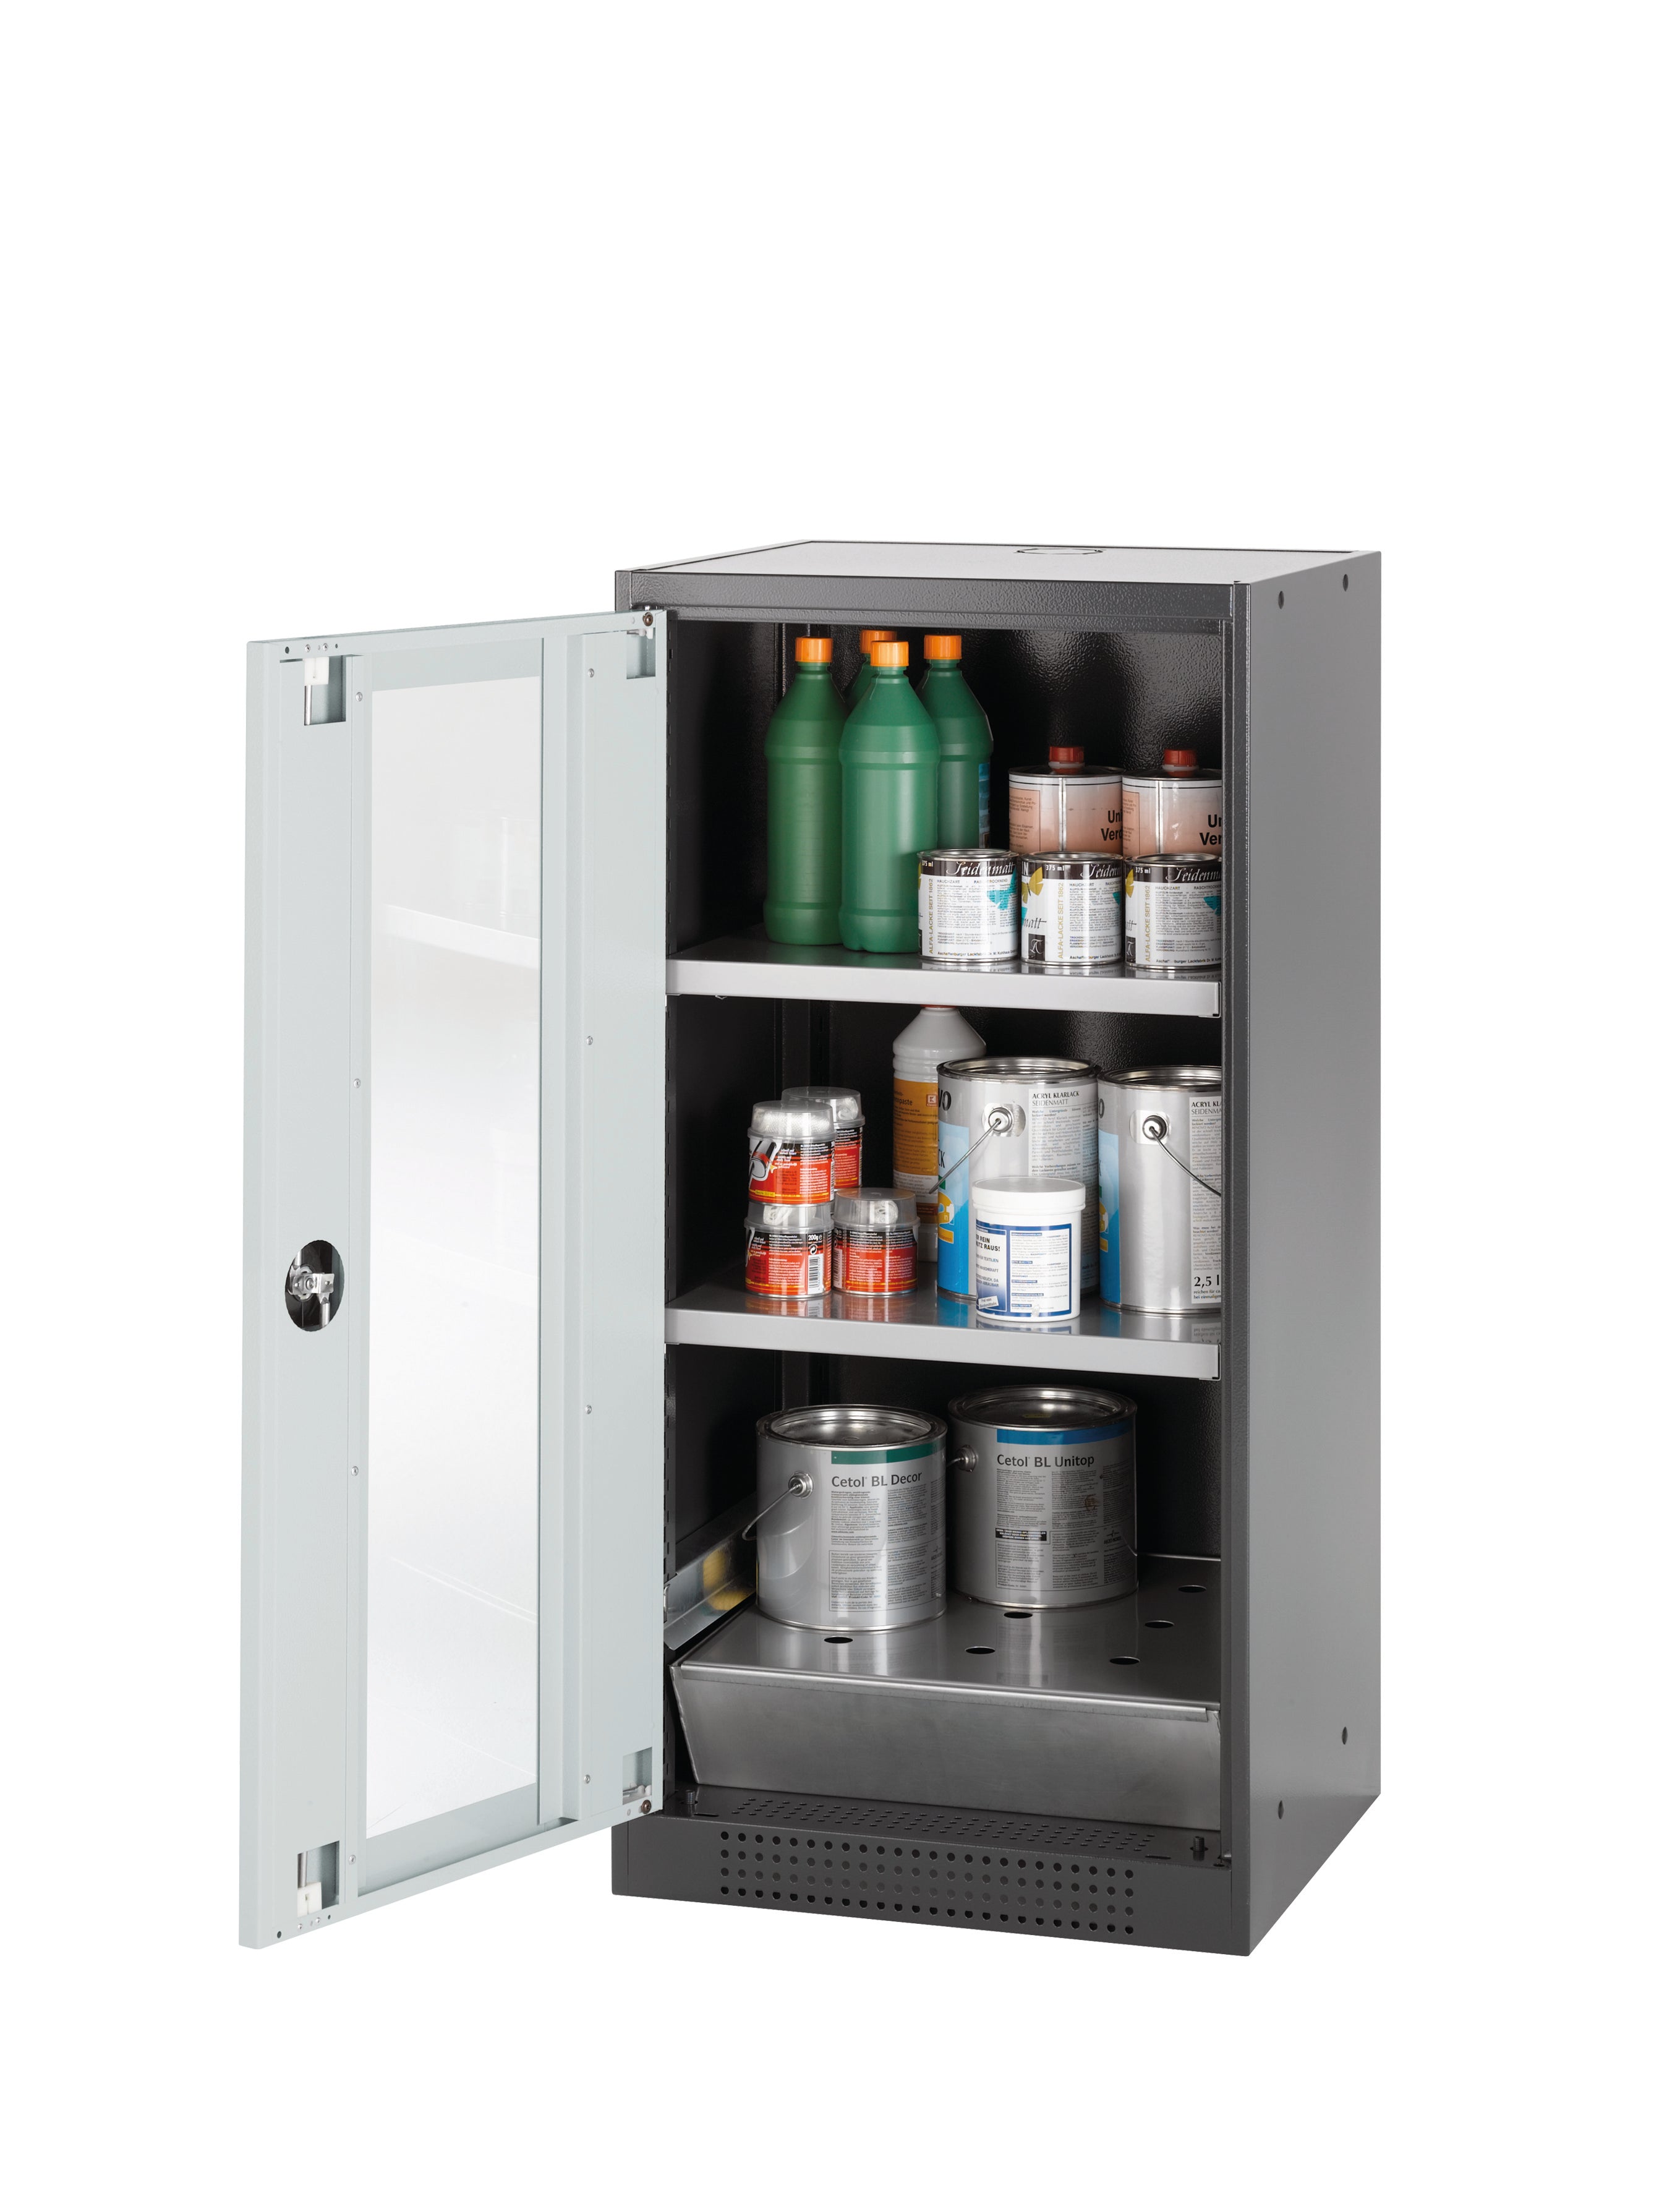 Chemical cabinet CS-CLASSIC-G model CS.110.054.WDFW in light gray RAL 7035 with 2x standard shelves (sheet steel)